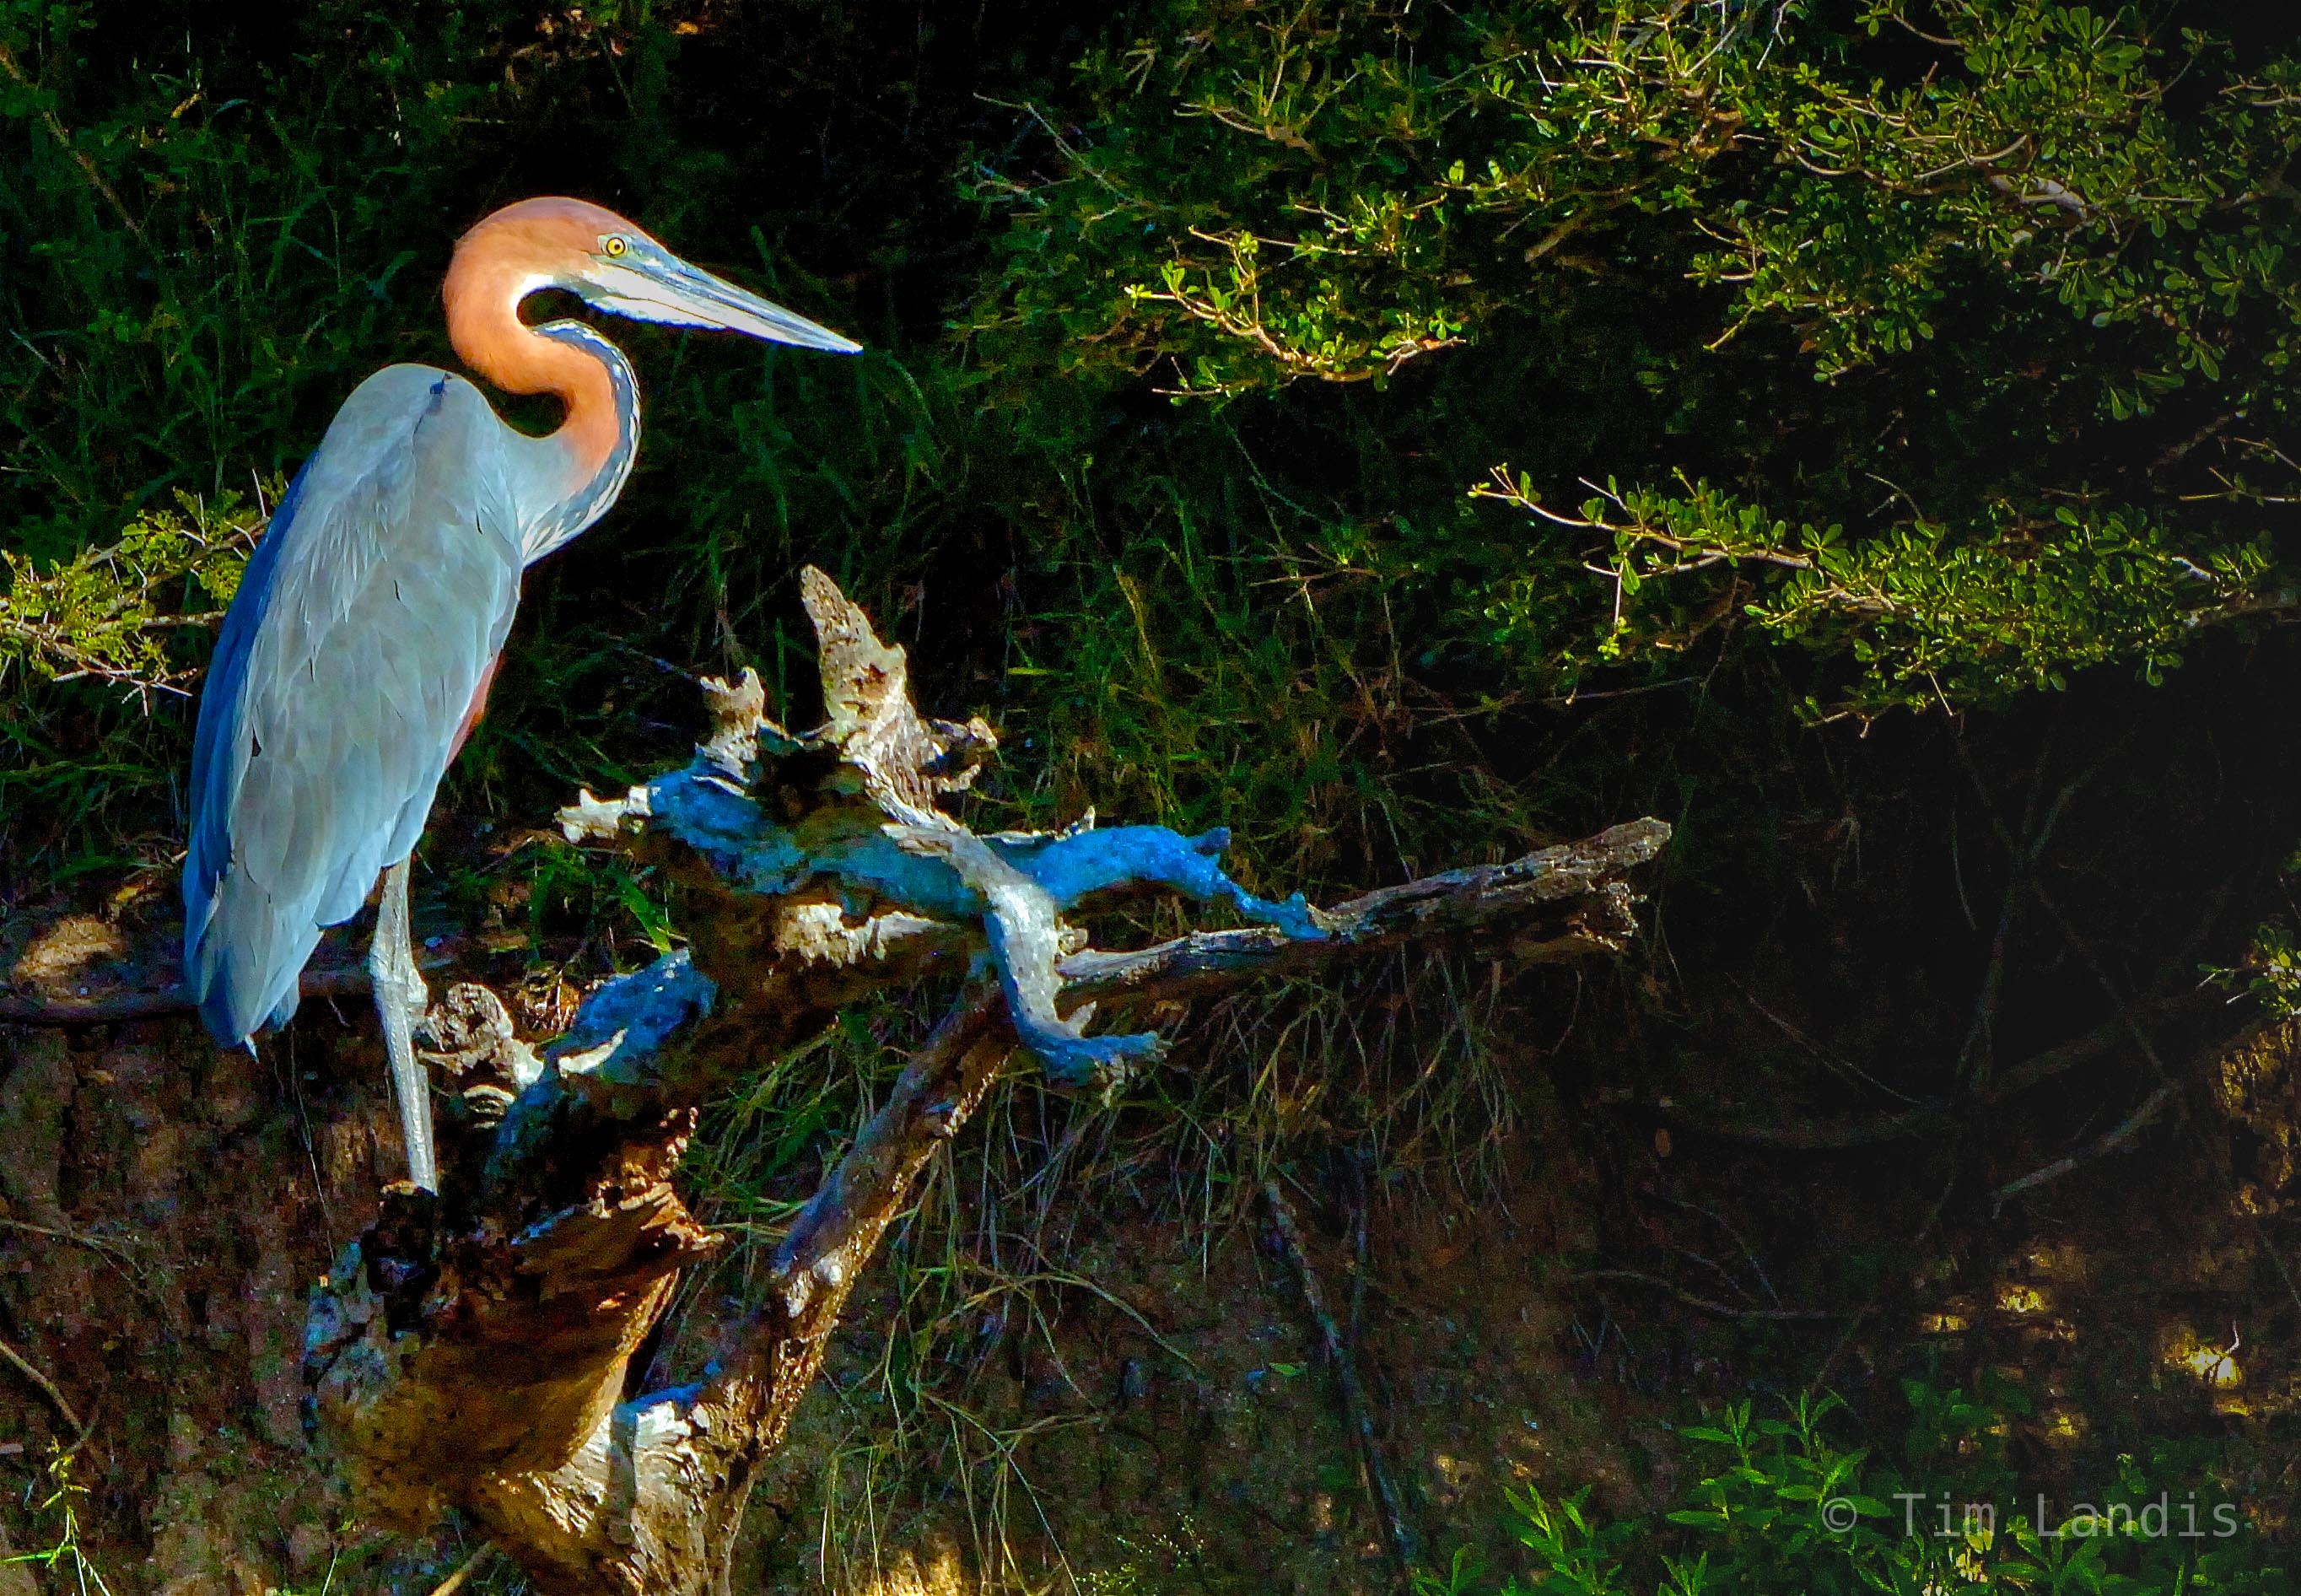 Up to 5 &nbsp;feet tall, wingspan to 7 1/2 feet wide, the worlds largest heron waits for a fish to rise.